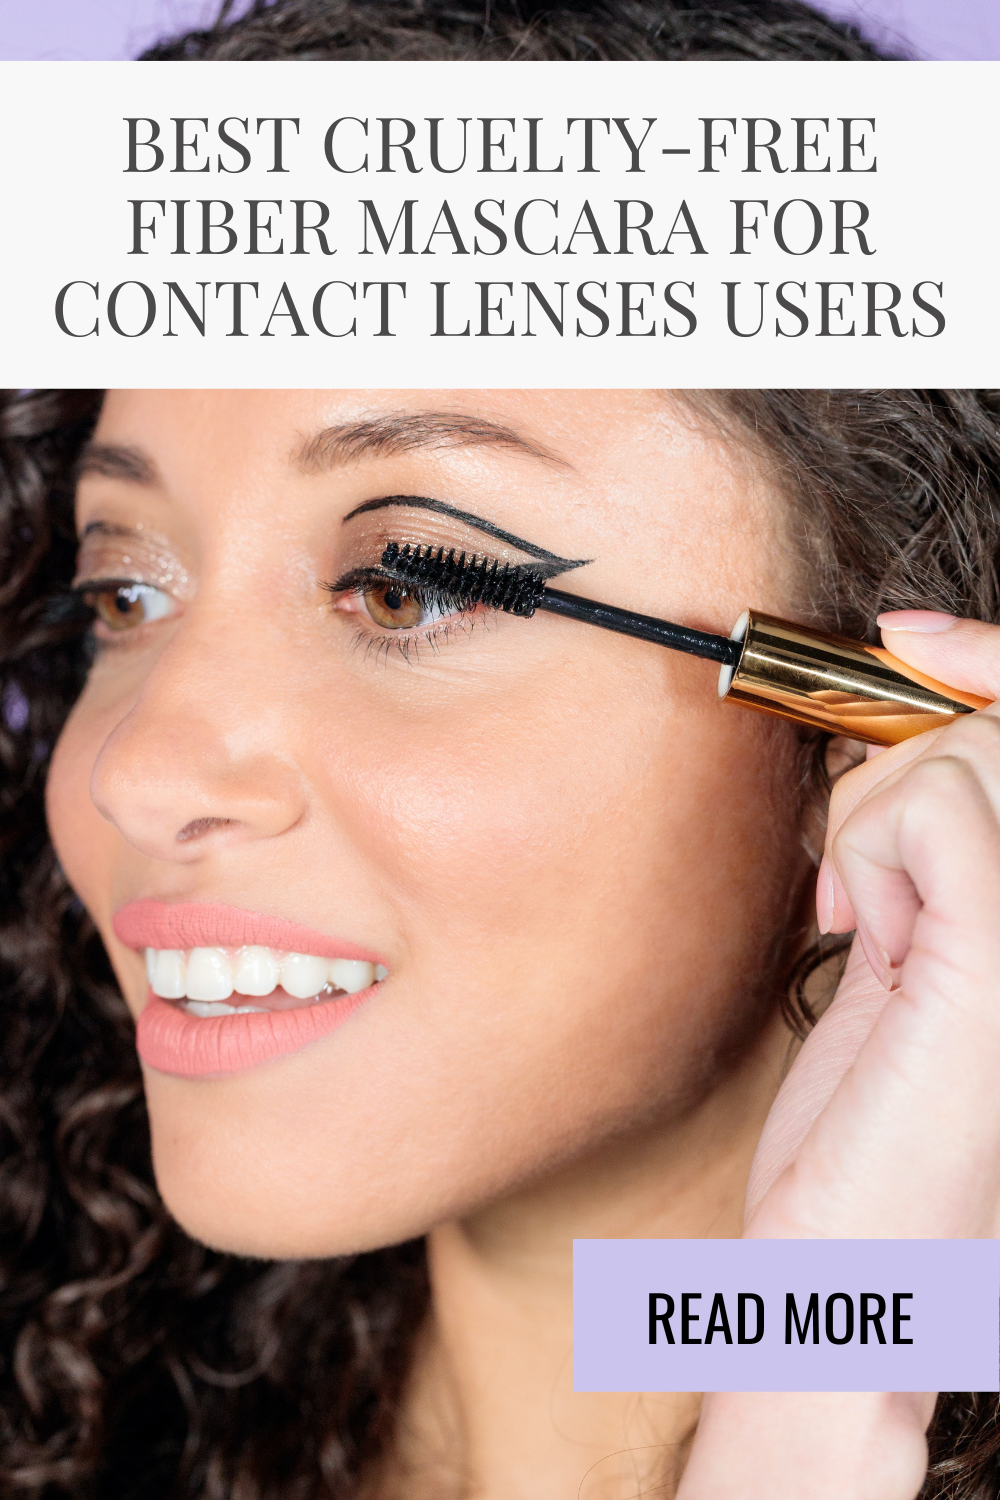 Best Cruelty-free Fiber Mascara for Contact Lenses Users